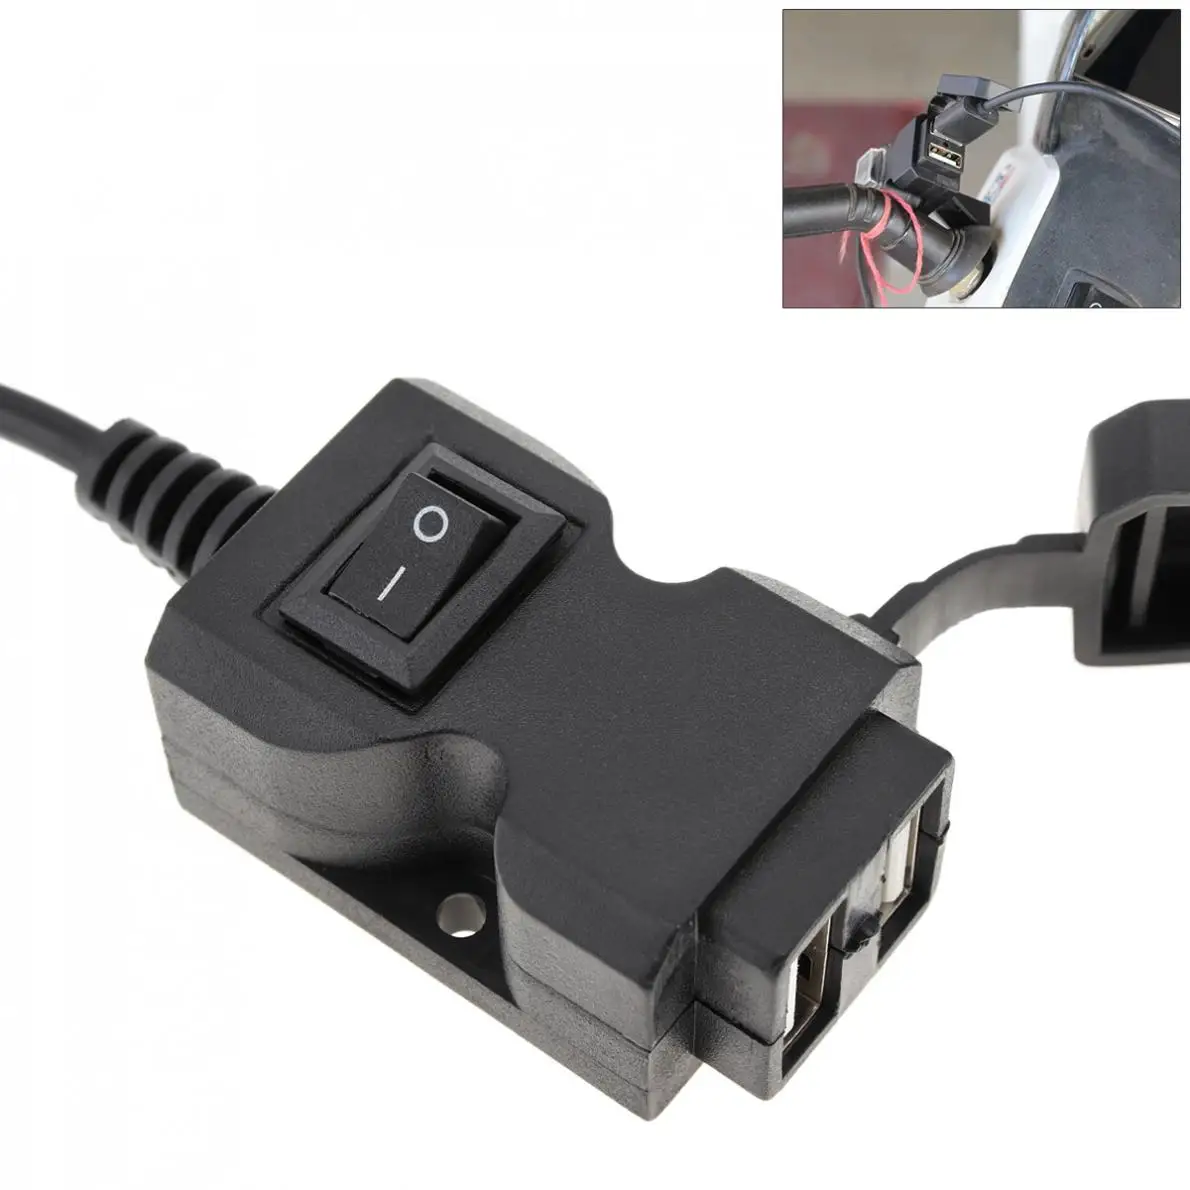 

Dual USB Port 12V Waterproof Motorbike Motorcycle Handlebar Charger 5V 1A 2.1A Adapter Power Supply Socket for Mobile Phone